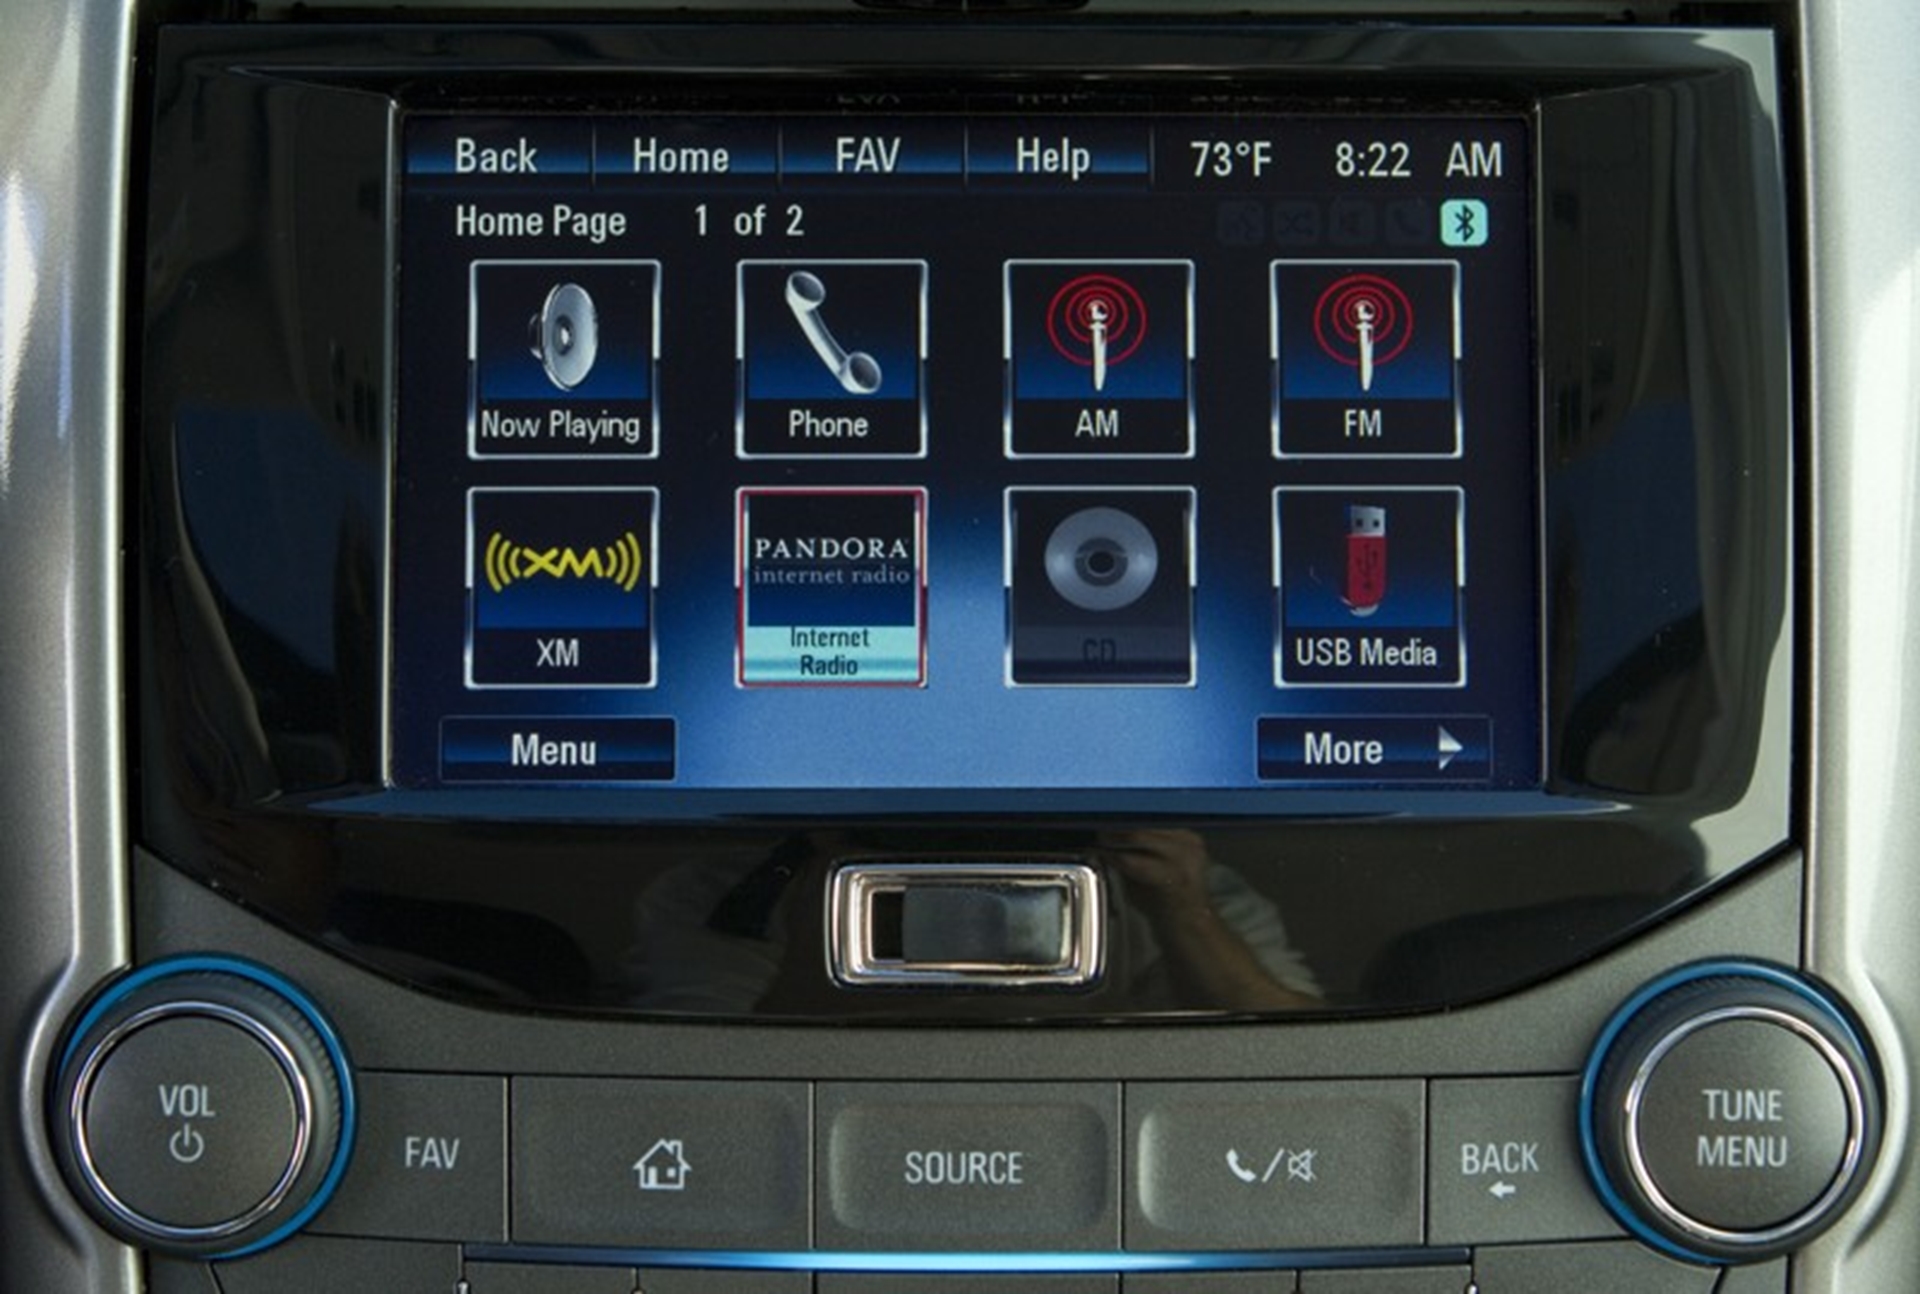 2013 Chevrolet Malibu Connects Customers with MyLink